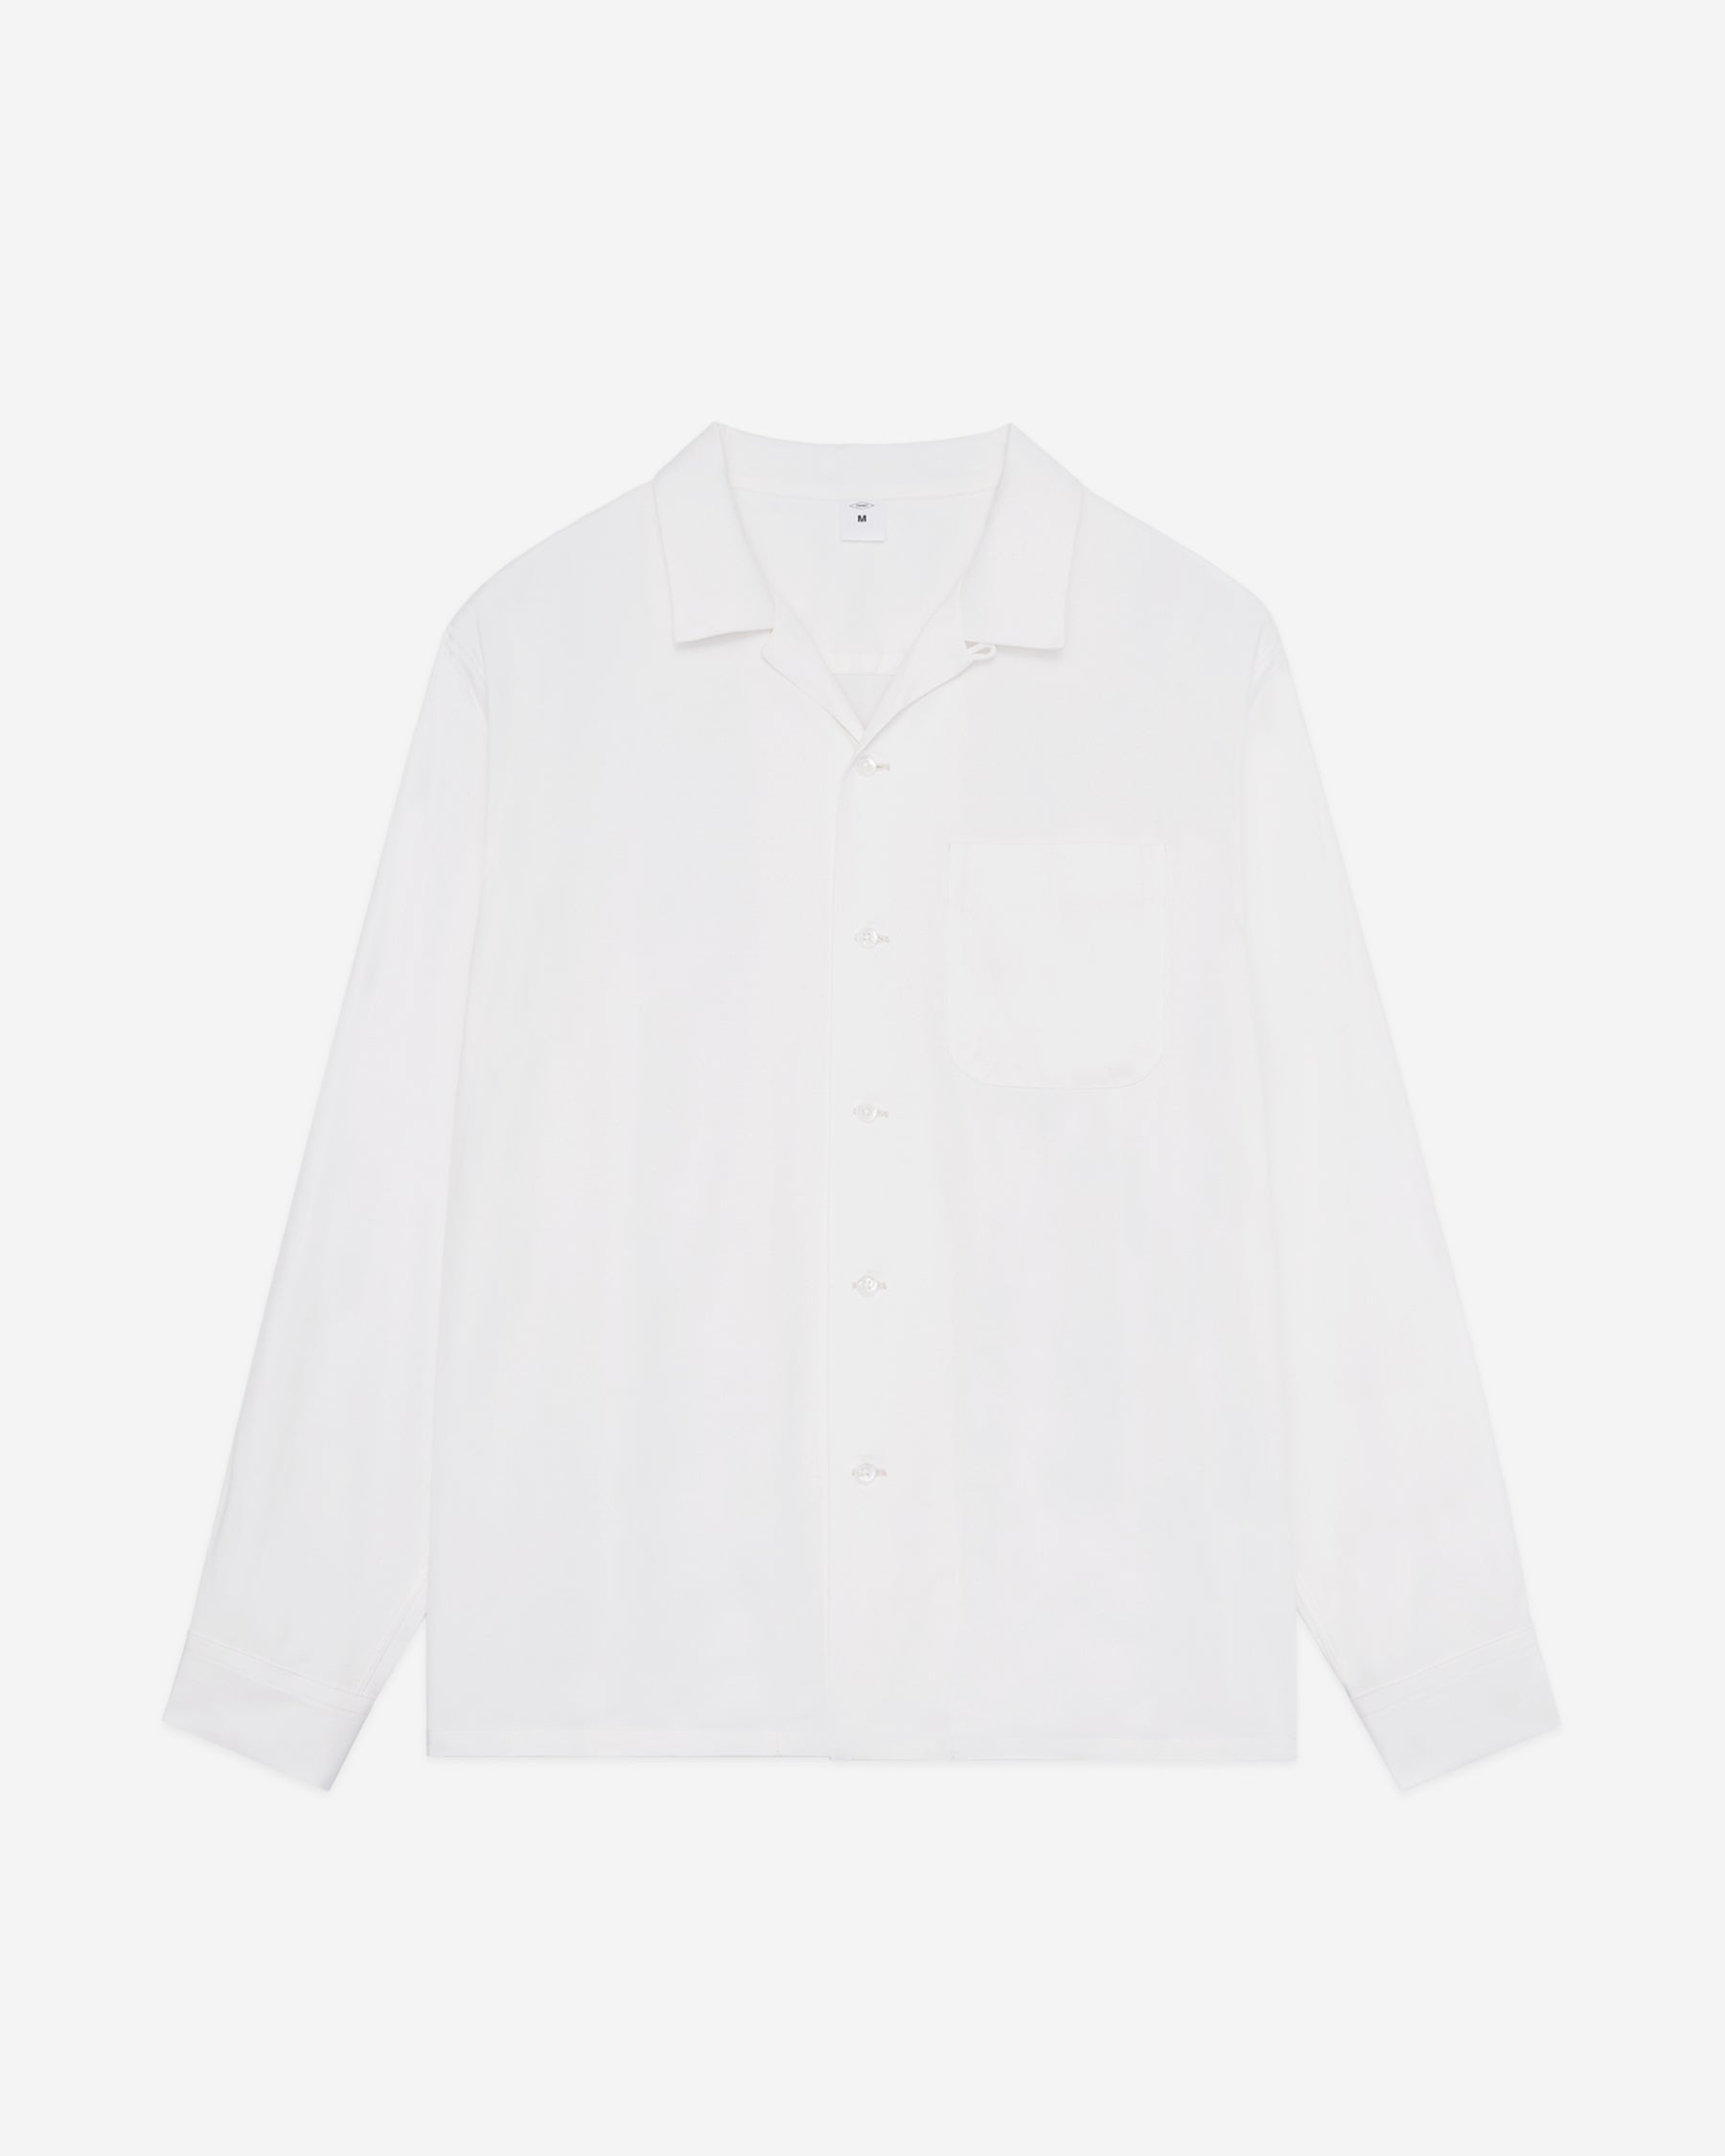 FRONT 11201 Original White Open Collar Rayon Shirt Made in Japan